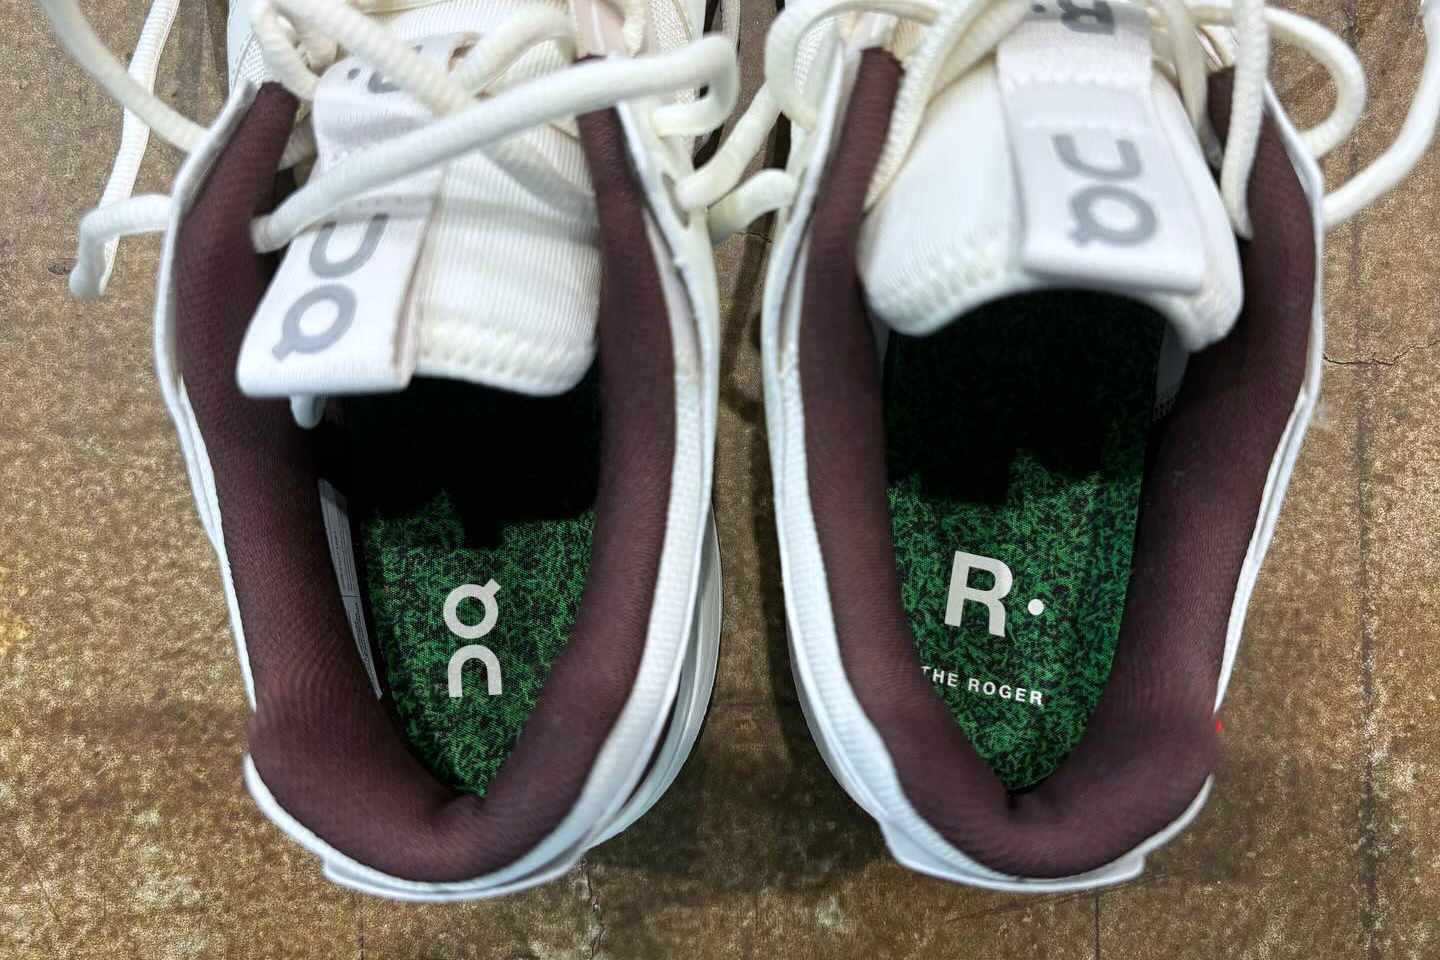 Roger Federer's On ROGER tennis sneaker in white and black with grass insole designed by atmos Japan